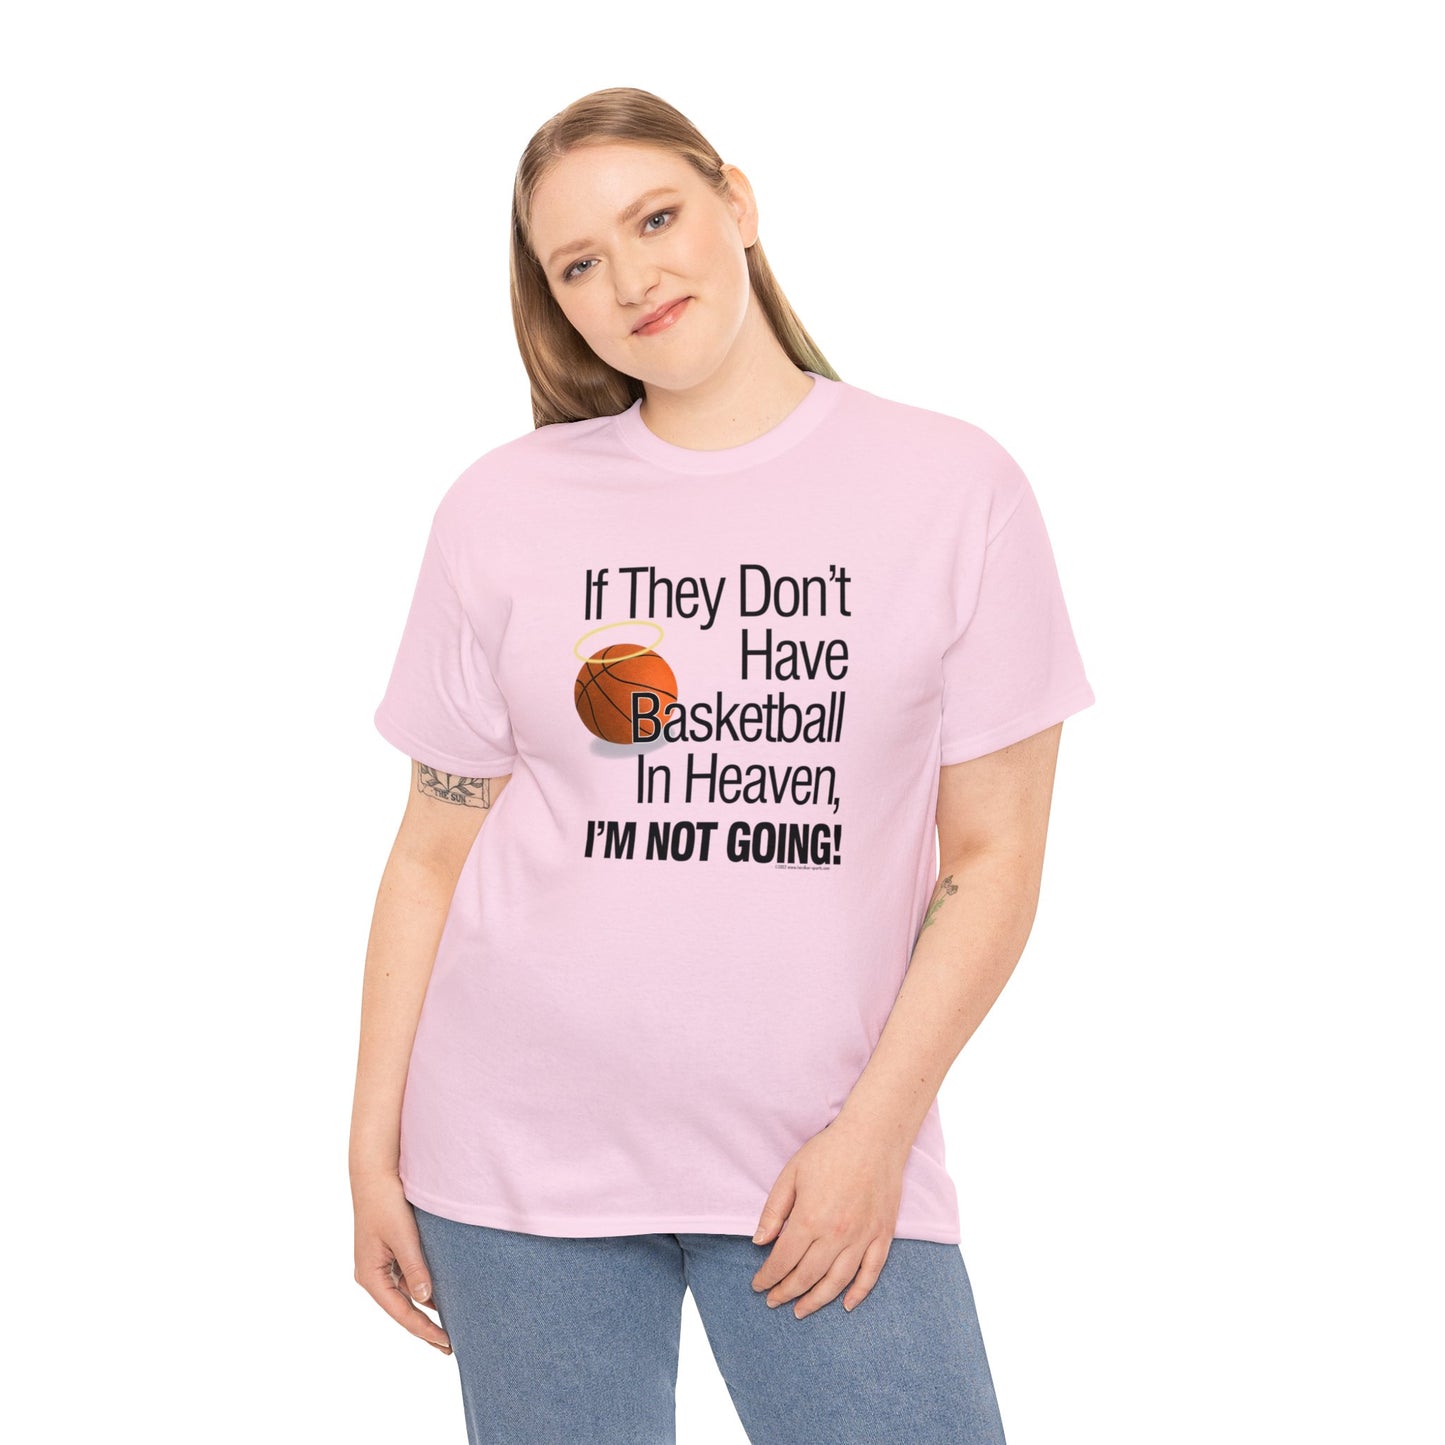 If They Don't Have Basketball in Heaven, I'm Not Going, Basketball T-Shirt, Funny Basketball T, Basketball Gift, Basketball Team Gift,